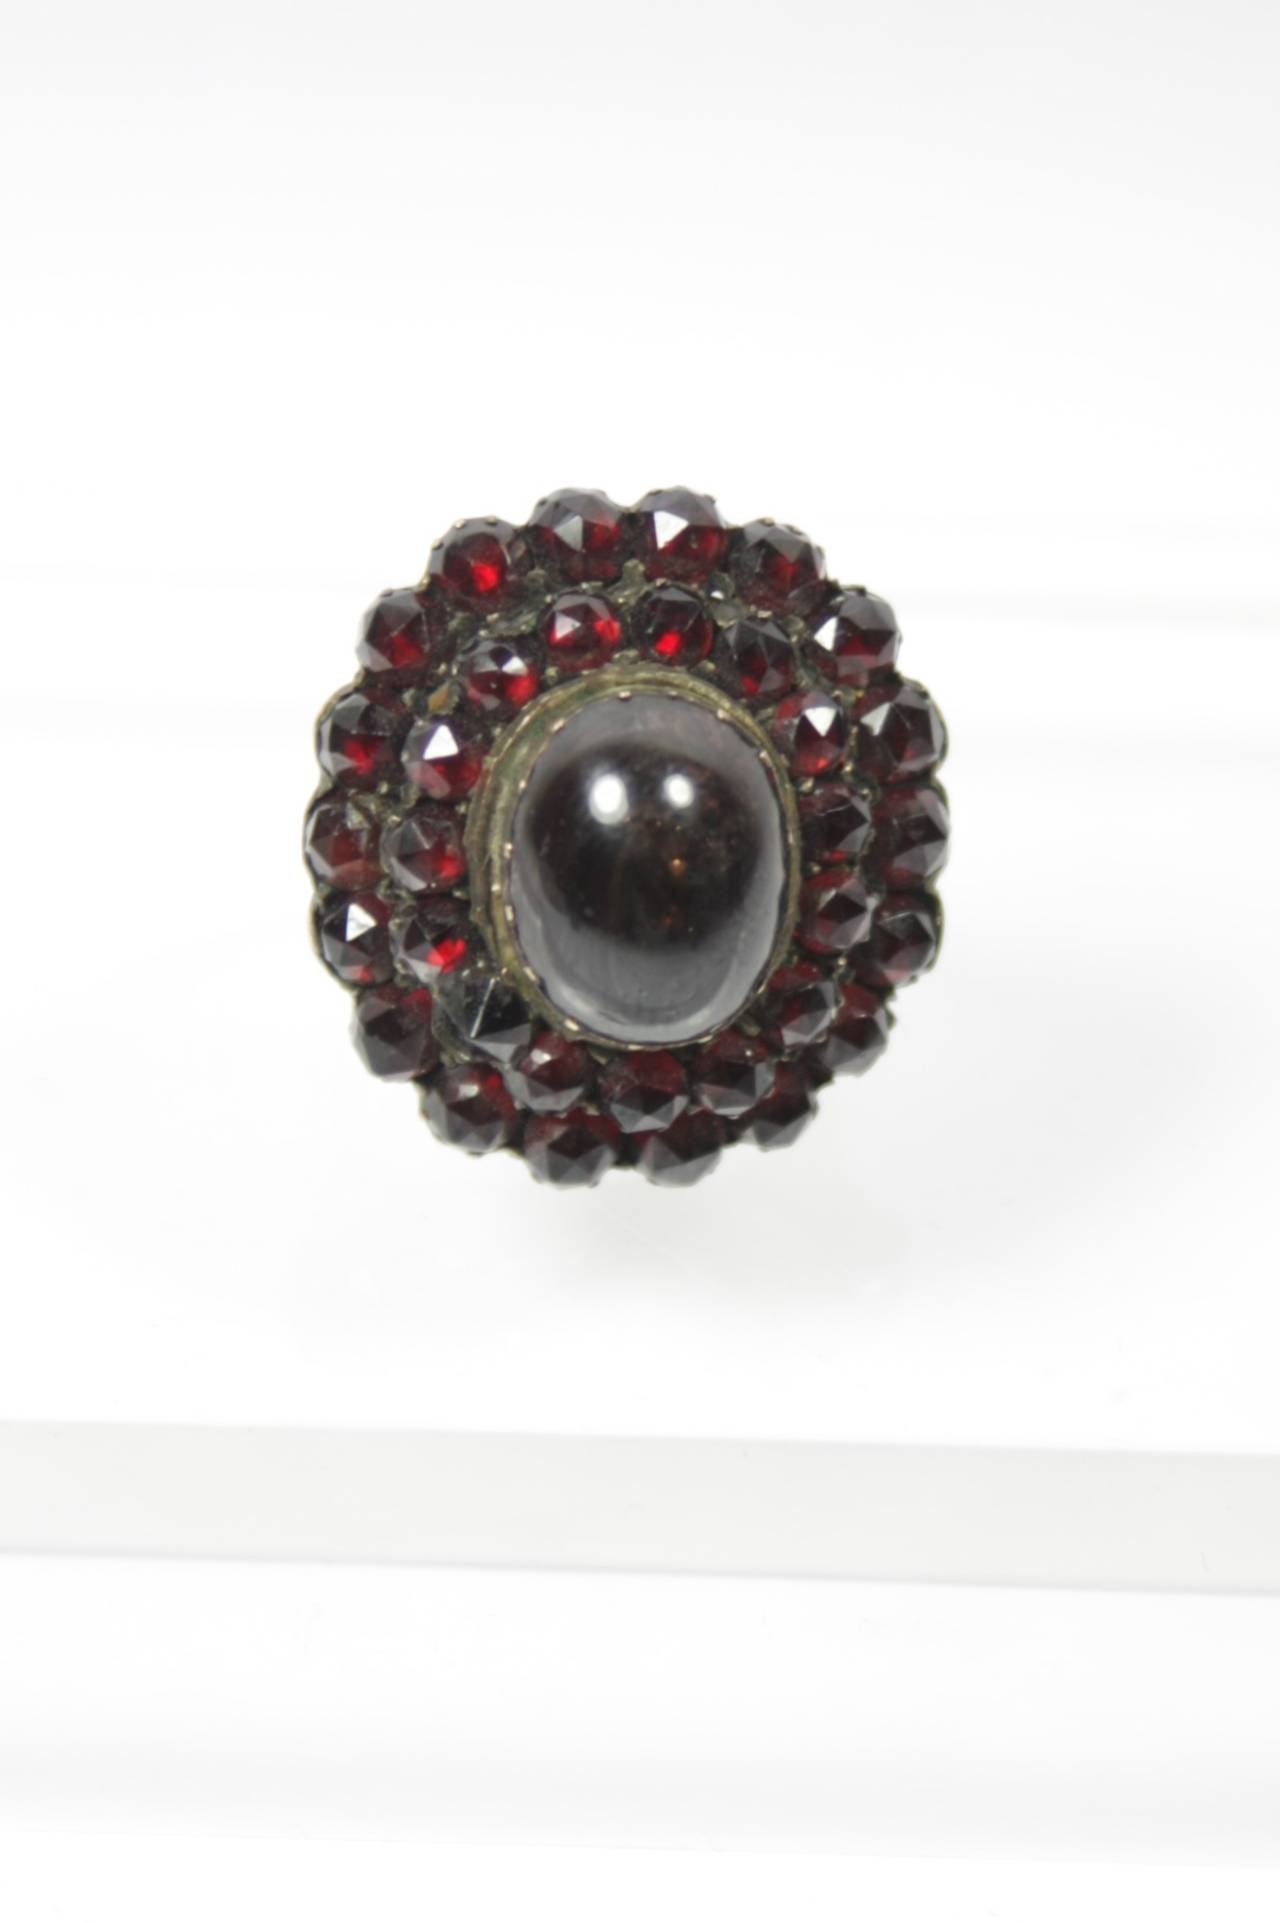 This ring is composed of 14KT gold and features Cabochon Cut Garnets. Beautiful cocktail ring. 

Specs: 
Garnets
14KT Gold
Measures: 1